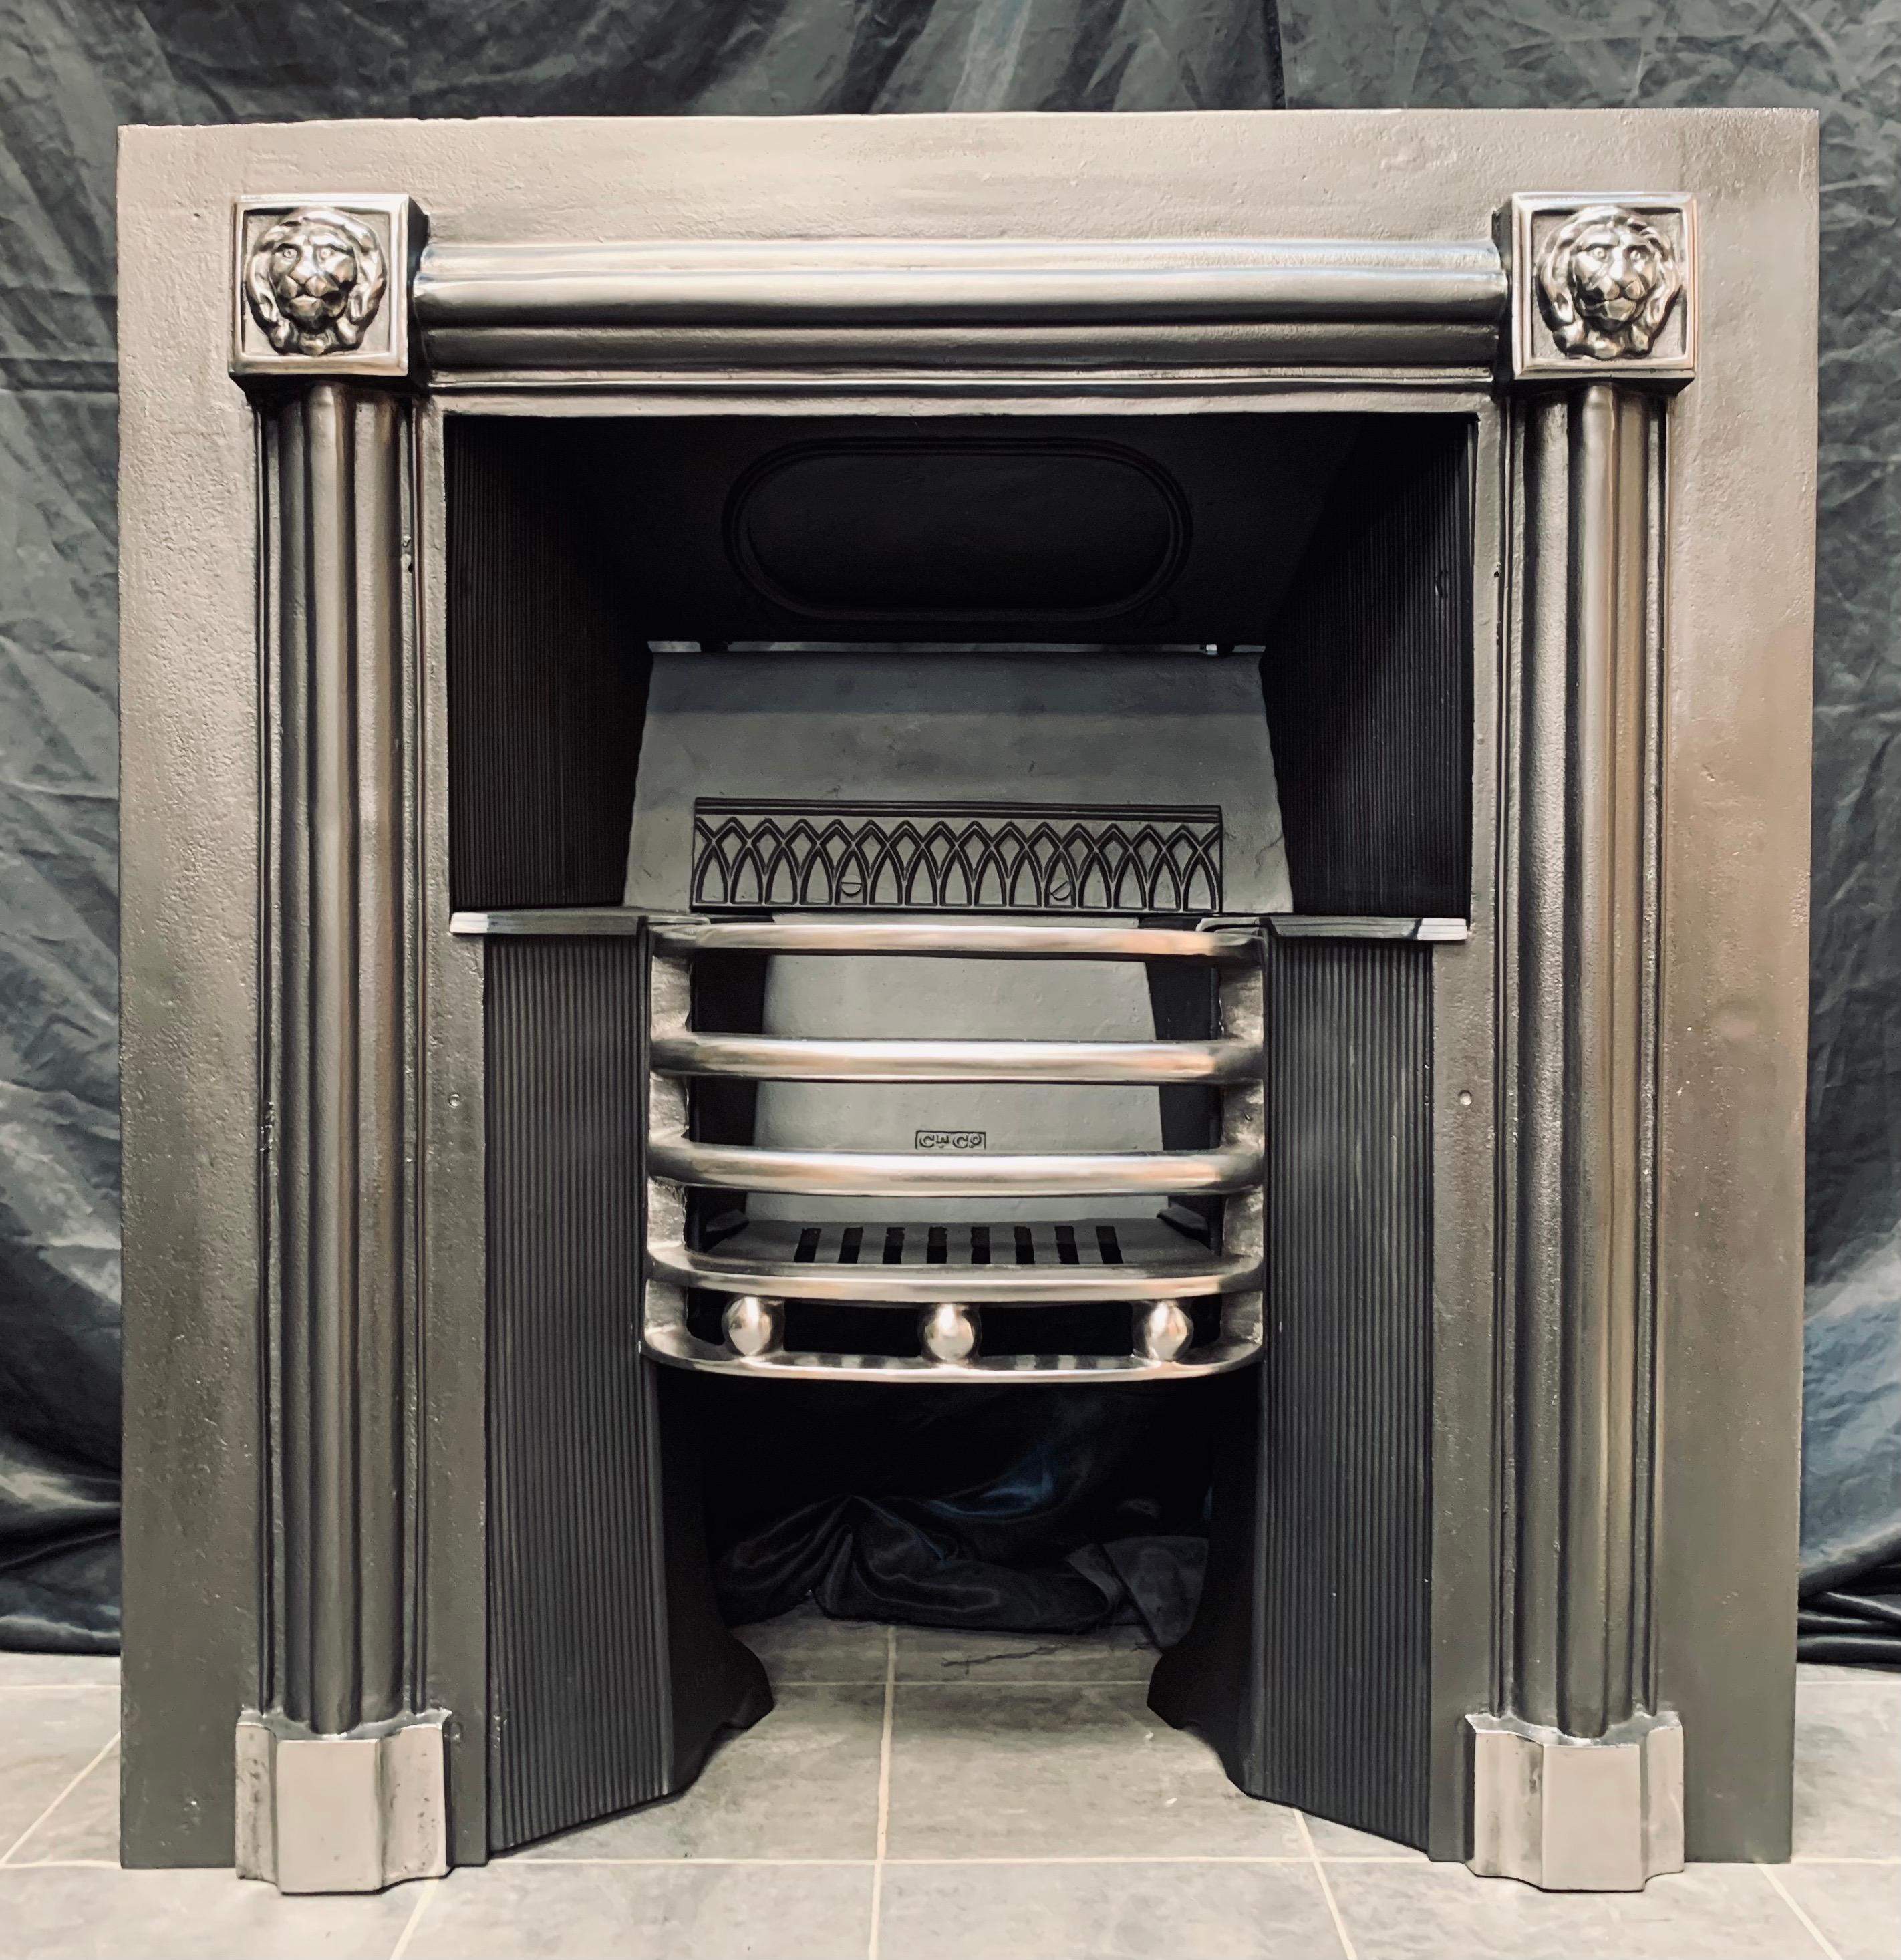 A versatile Scottish Georgian Manner Cast Iron Hob Grate fireplace insert by the renowned foundry Carron of Falkirk. A generous outer plate hosting raised barrel moulding with high relief Lion masks to each corner, finishing on shaped foot blocks. A